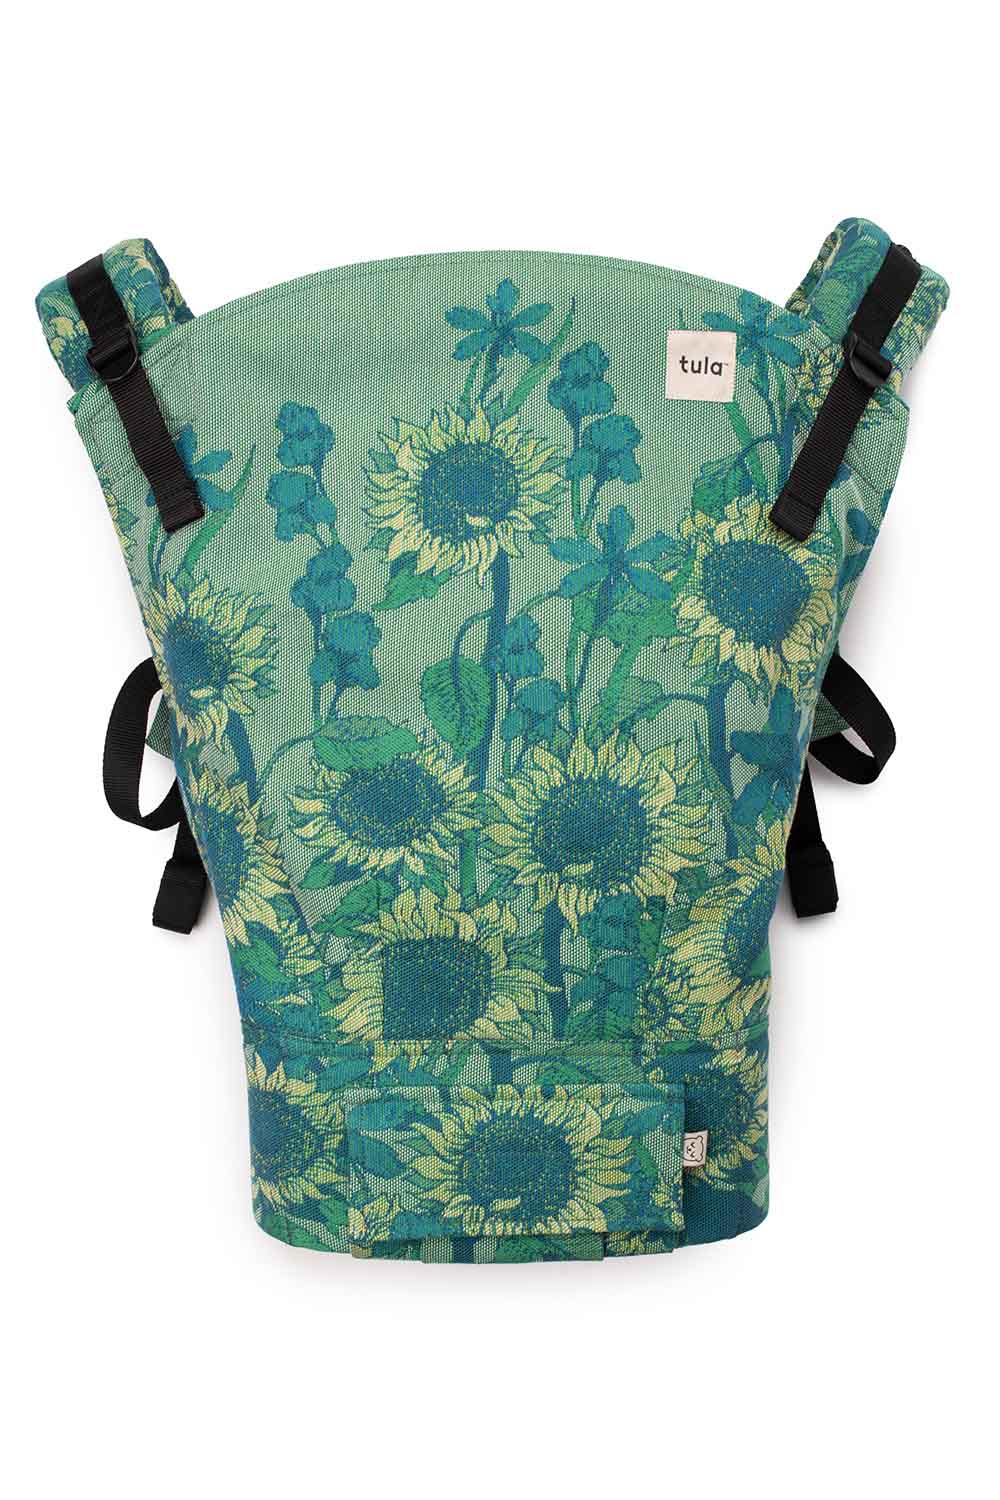 Sunflowers - Signature Woven Toddler Carrier